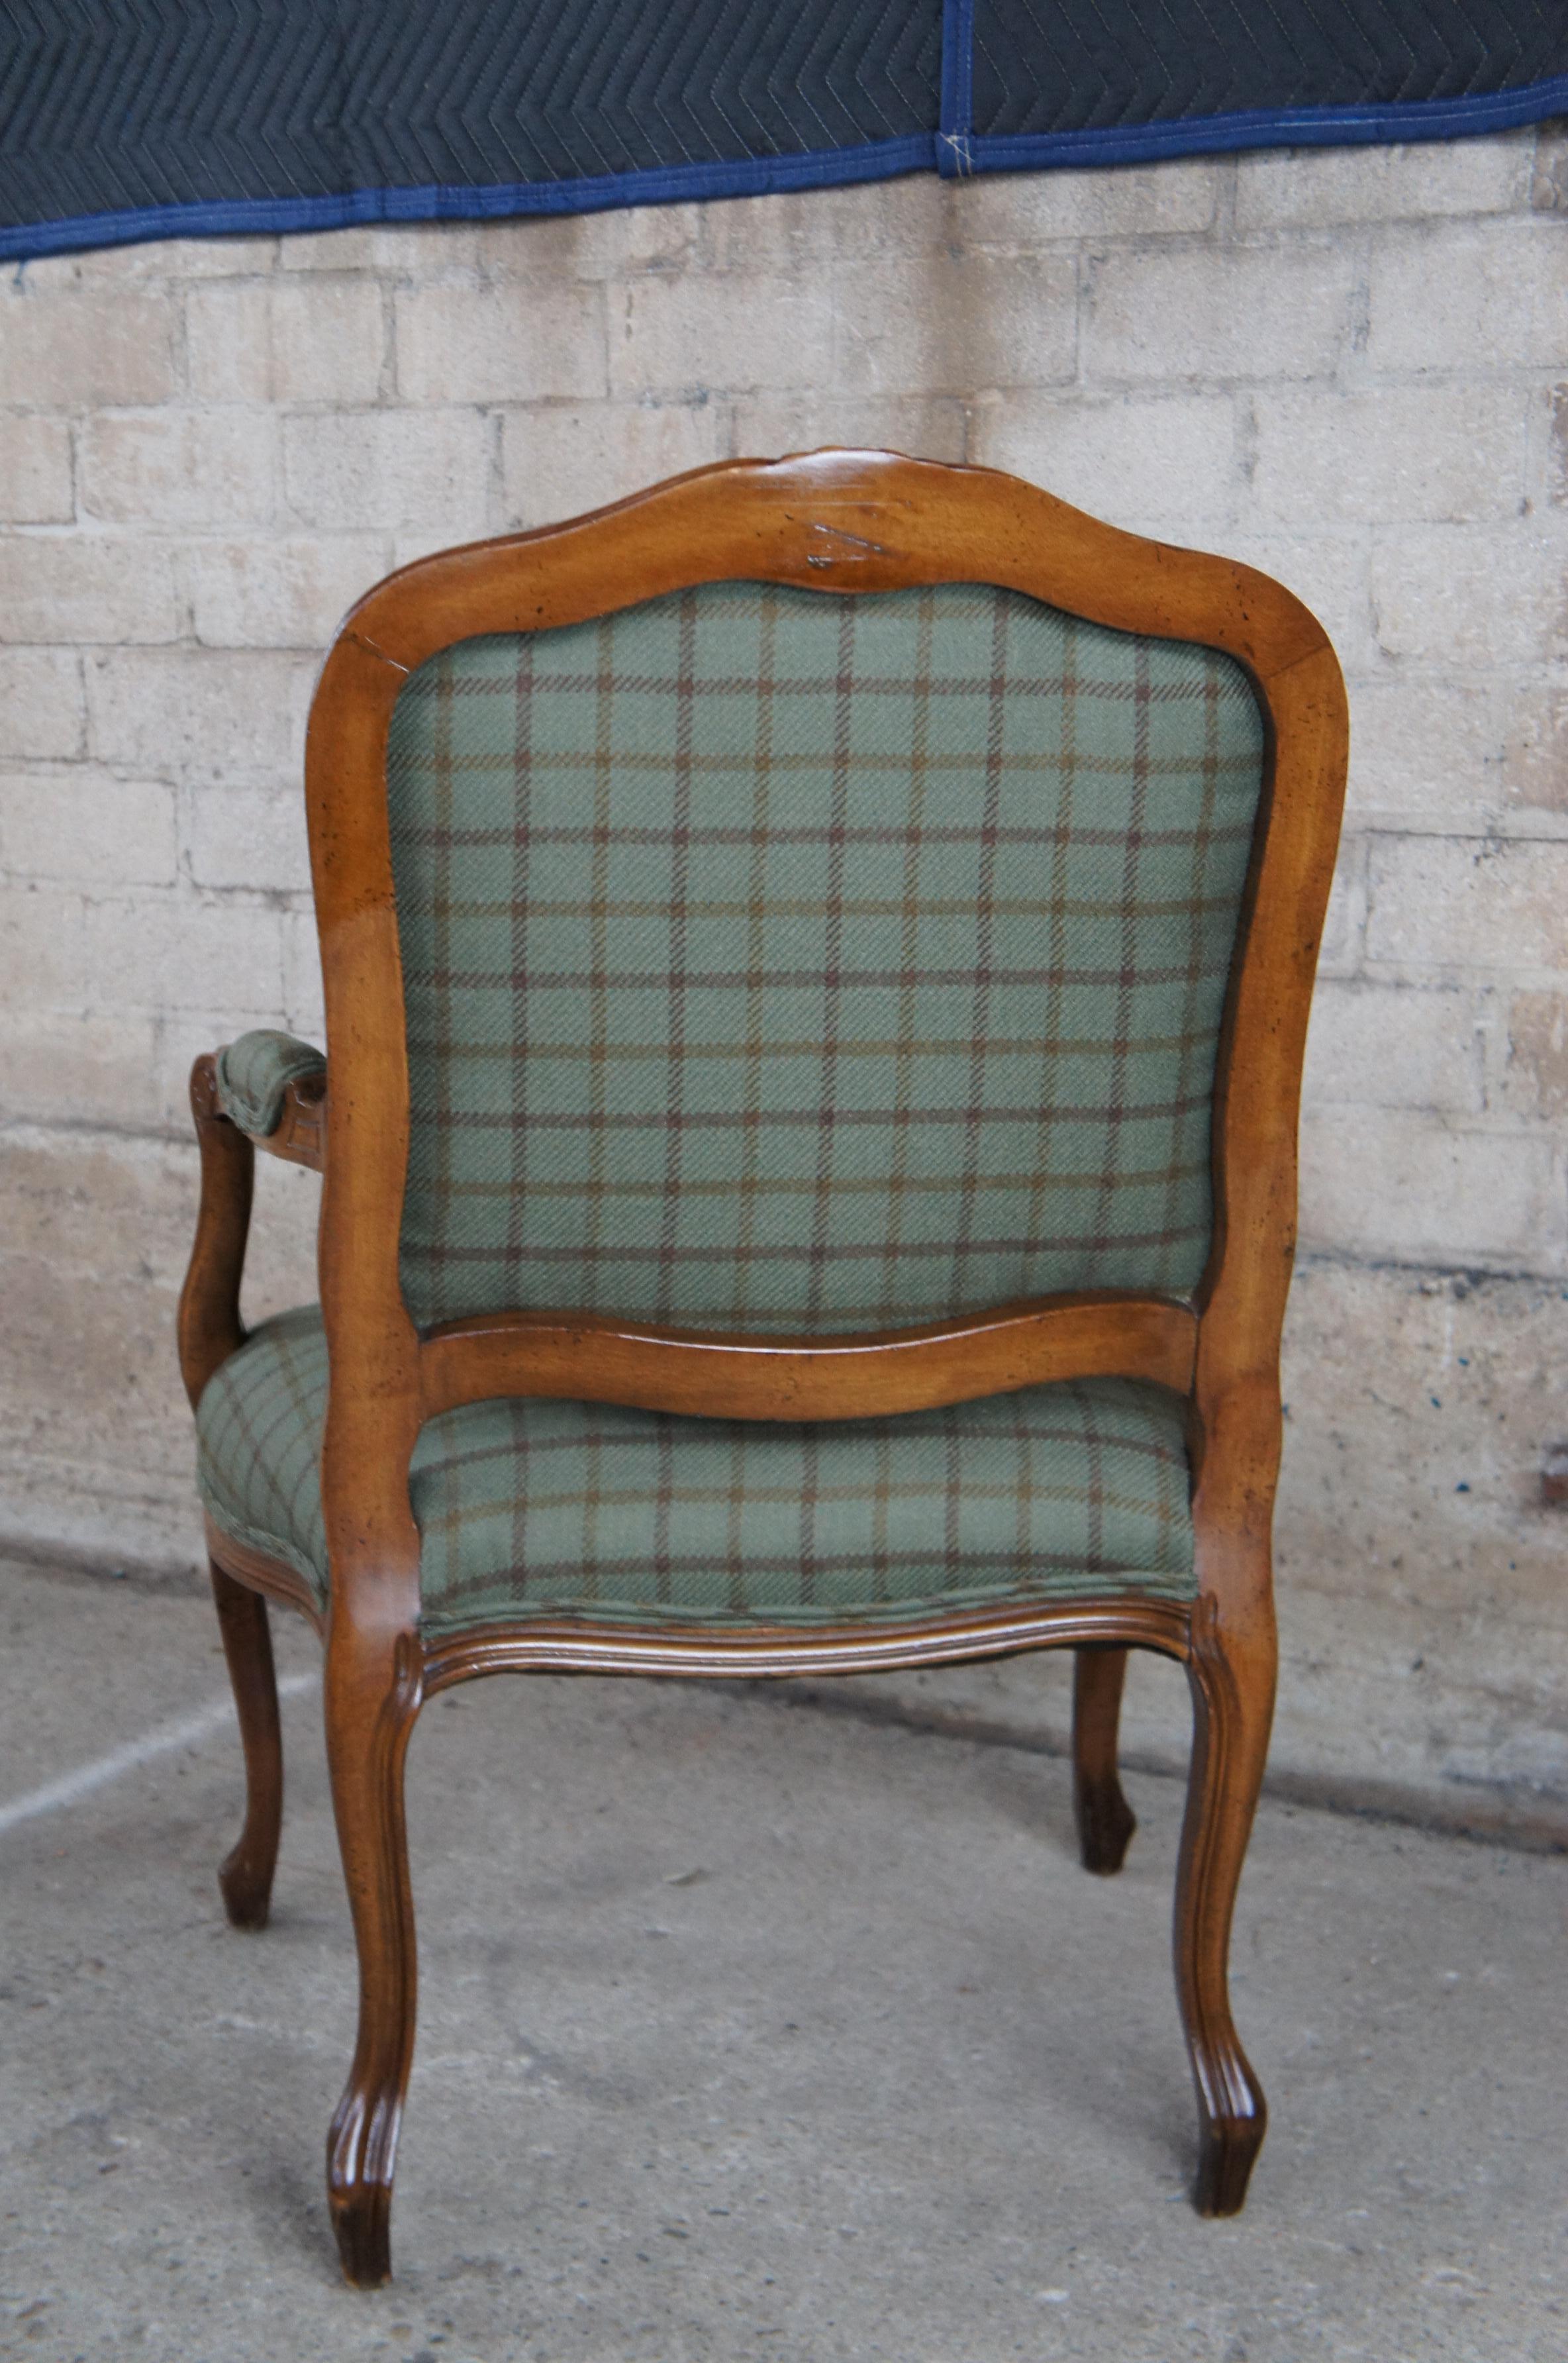 Upholstery 2 Meyer Gunther Martini French Louis XV Fauteuil Arm Chairs Ralph Lauren Plaid